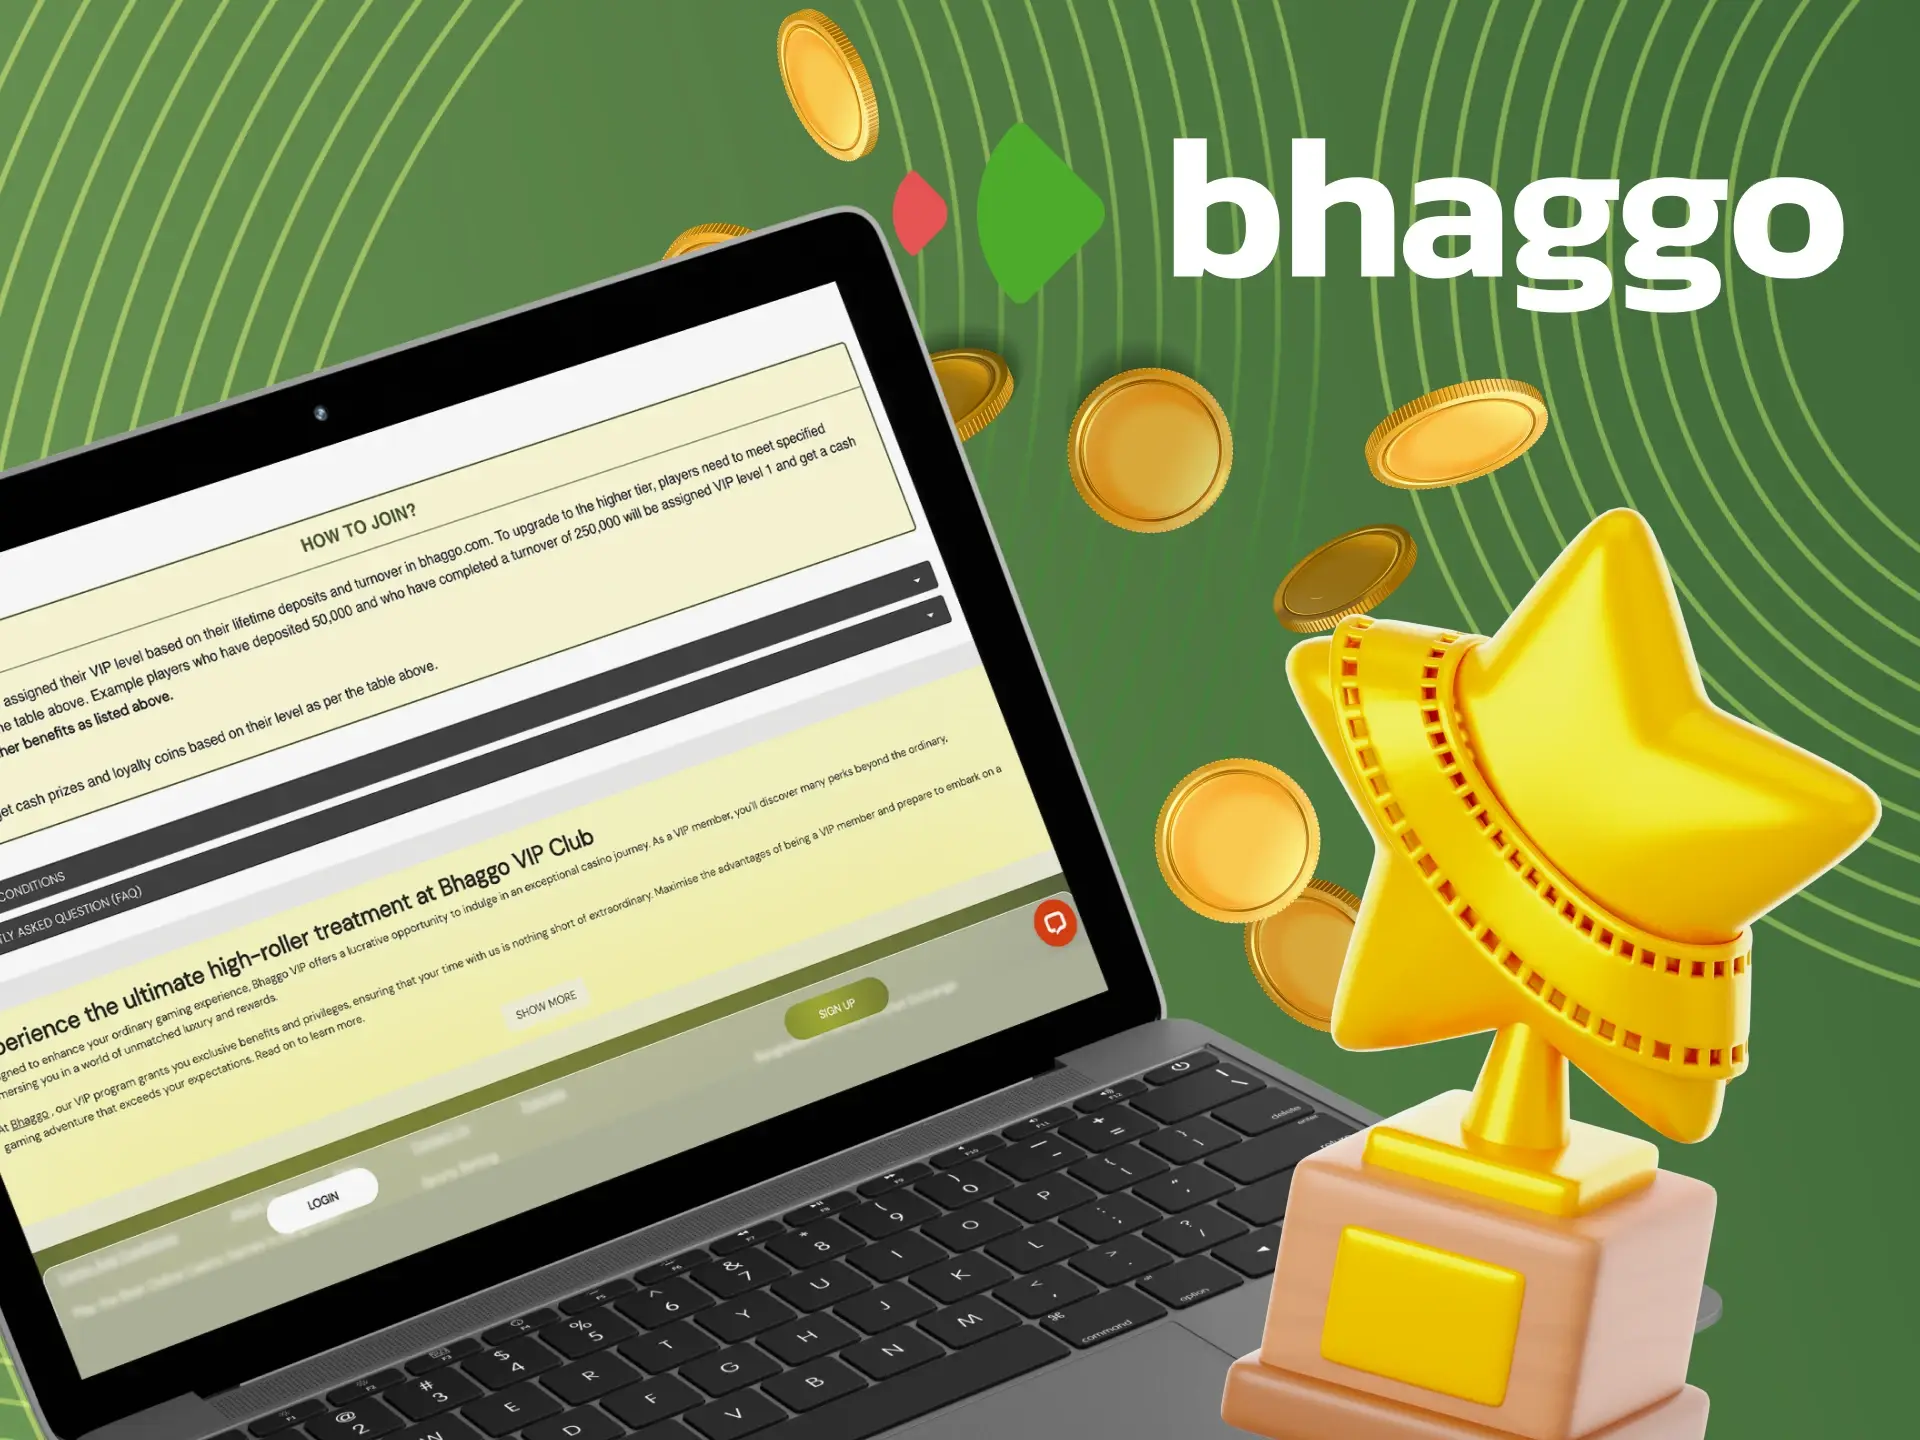 How to become a member of the Bhaggo VIP program.